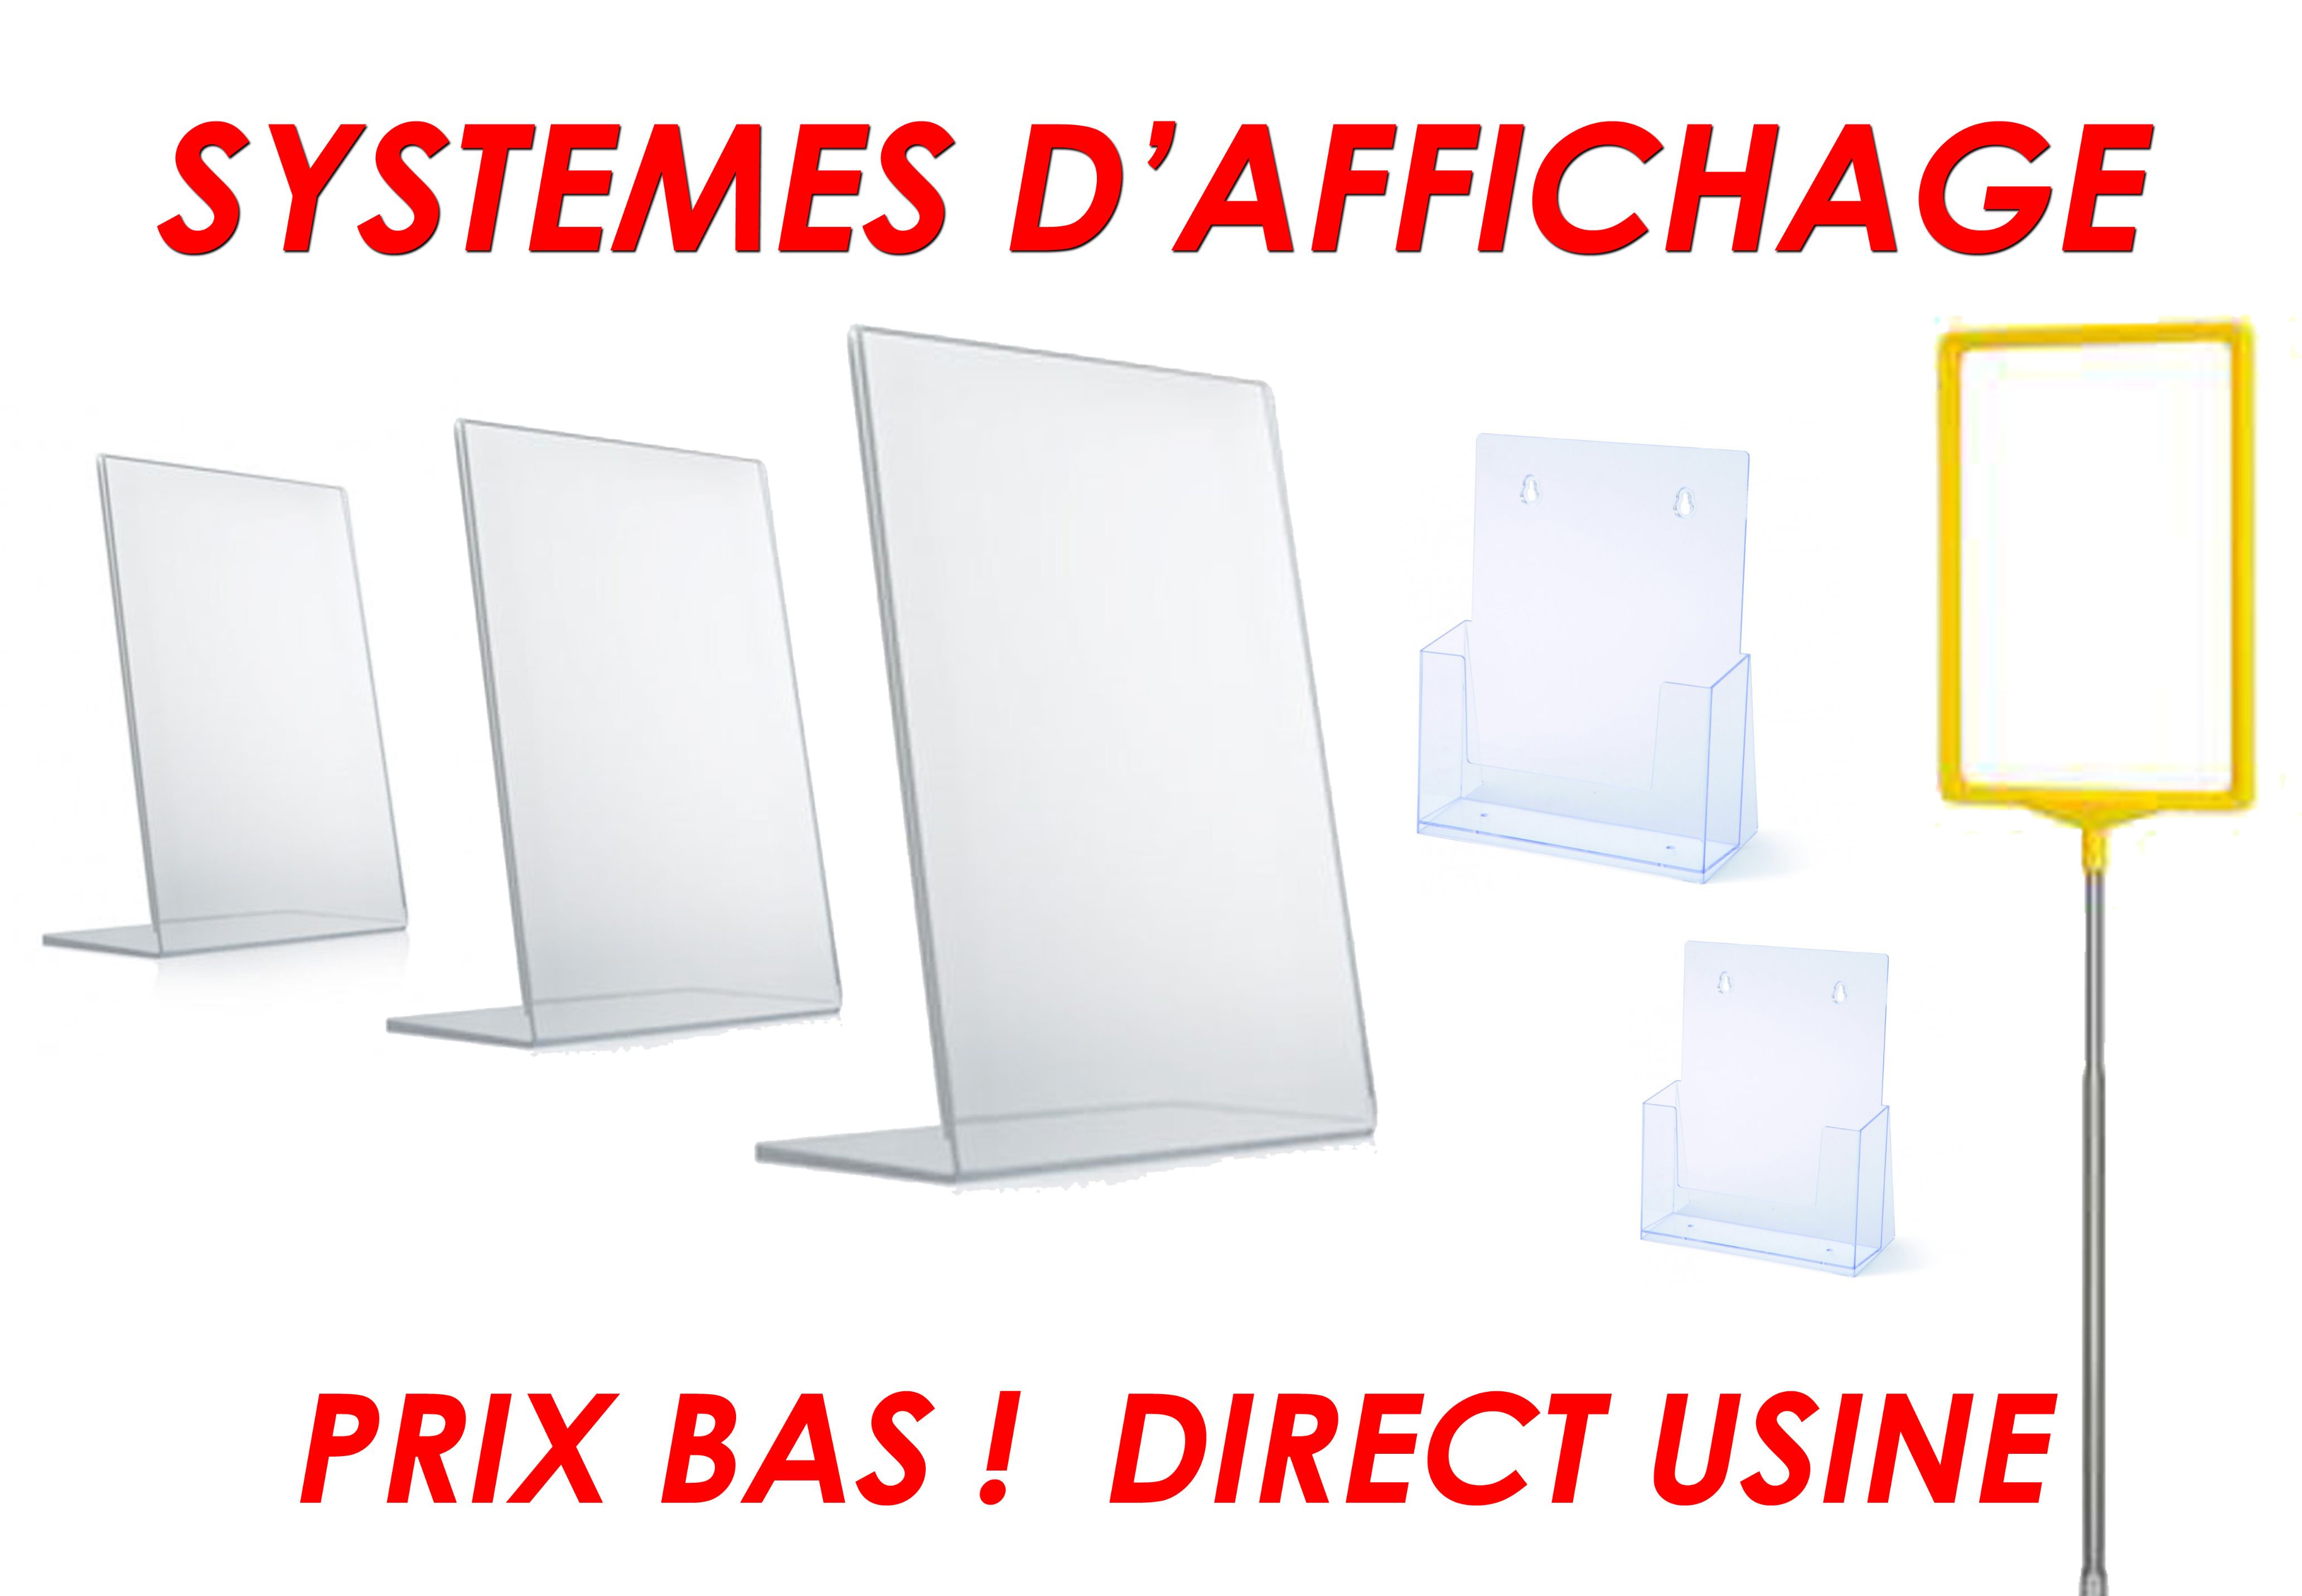 SYSTEMES D'AFFICHAGE